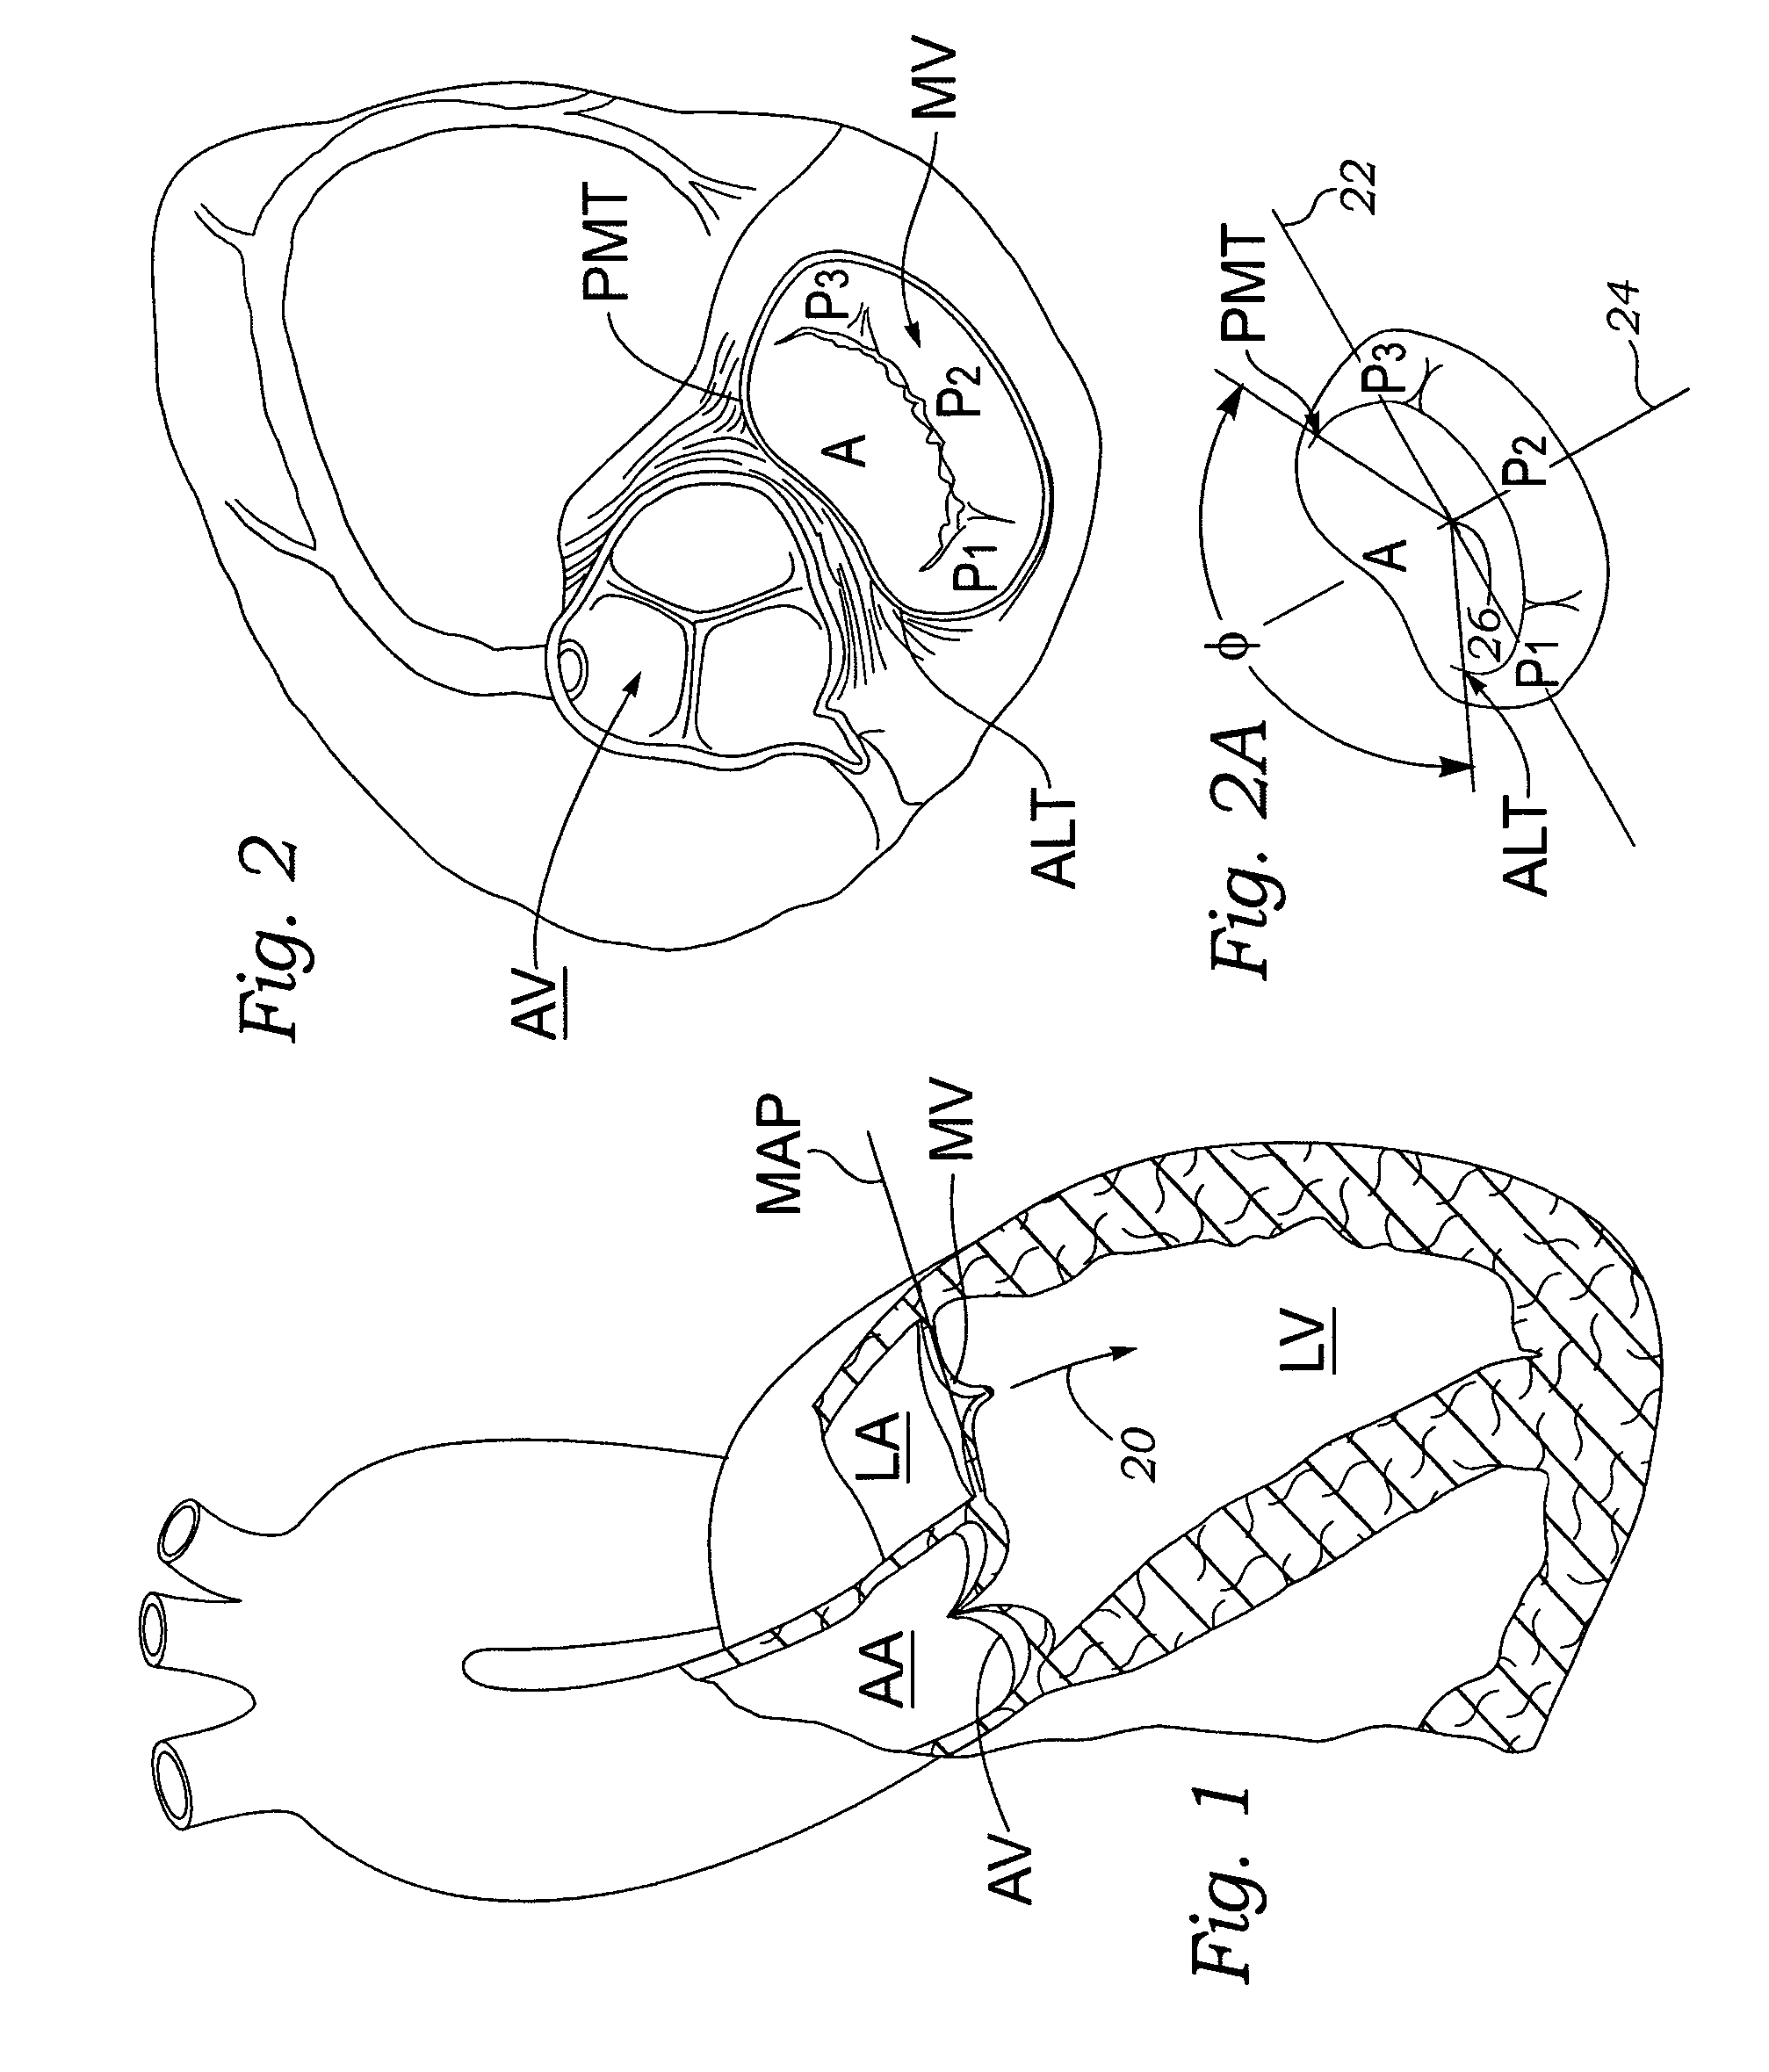 Methods of implanting a prosthetic mitral heart valve having a contoured sewing ring